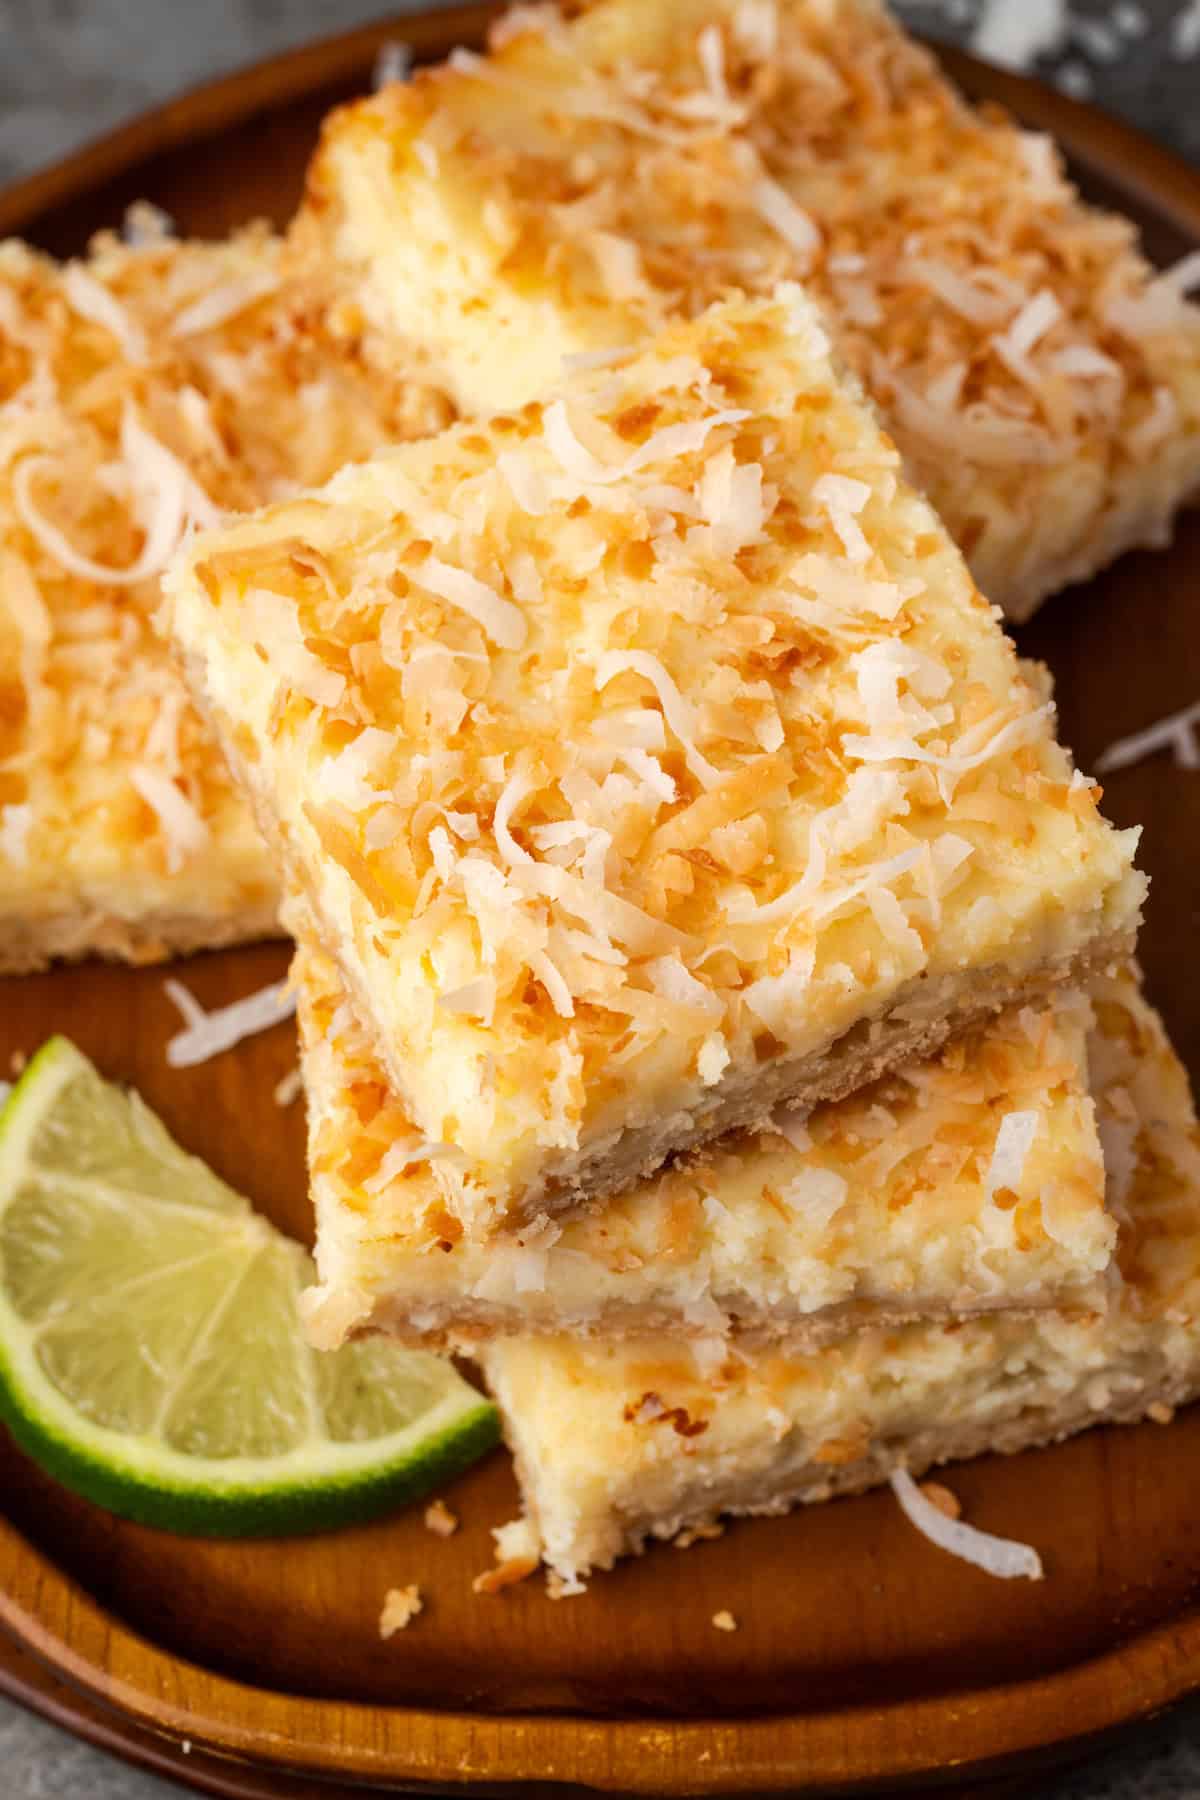 Overhead view of a stack of three coconut lime cheesecake bars on a plate, with more bars in the background.